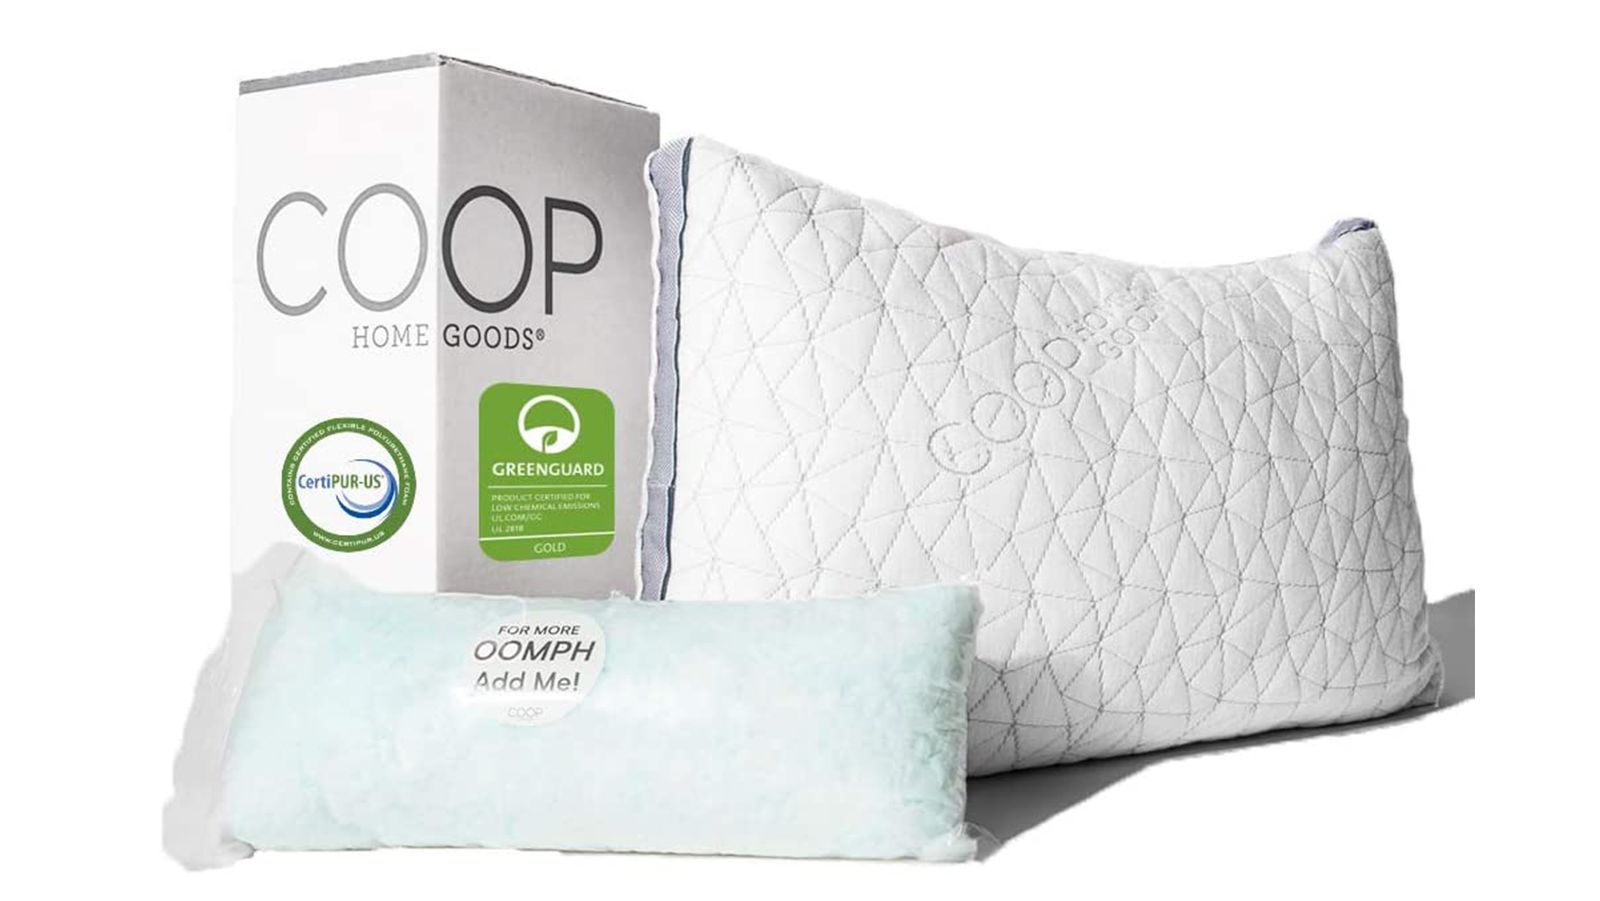 Back/Side Combination Sleeper Pillow - Small Size — DreamFlow Pillow